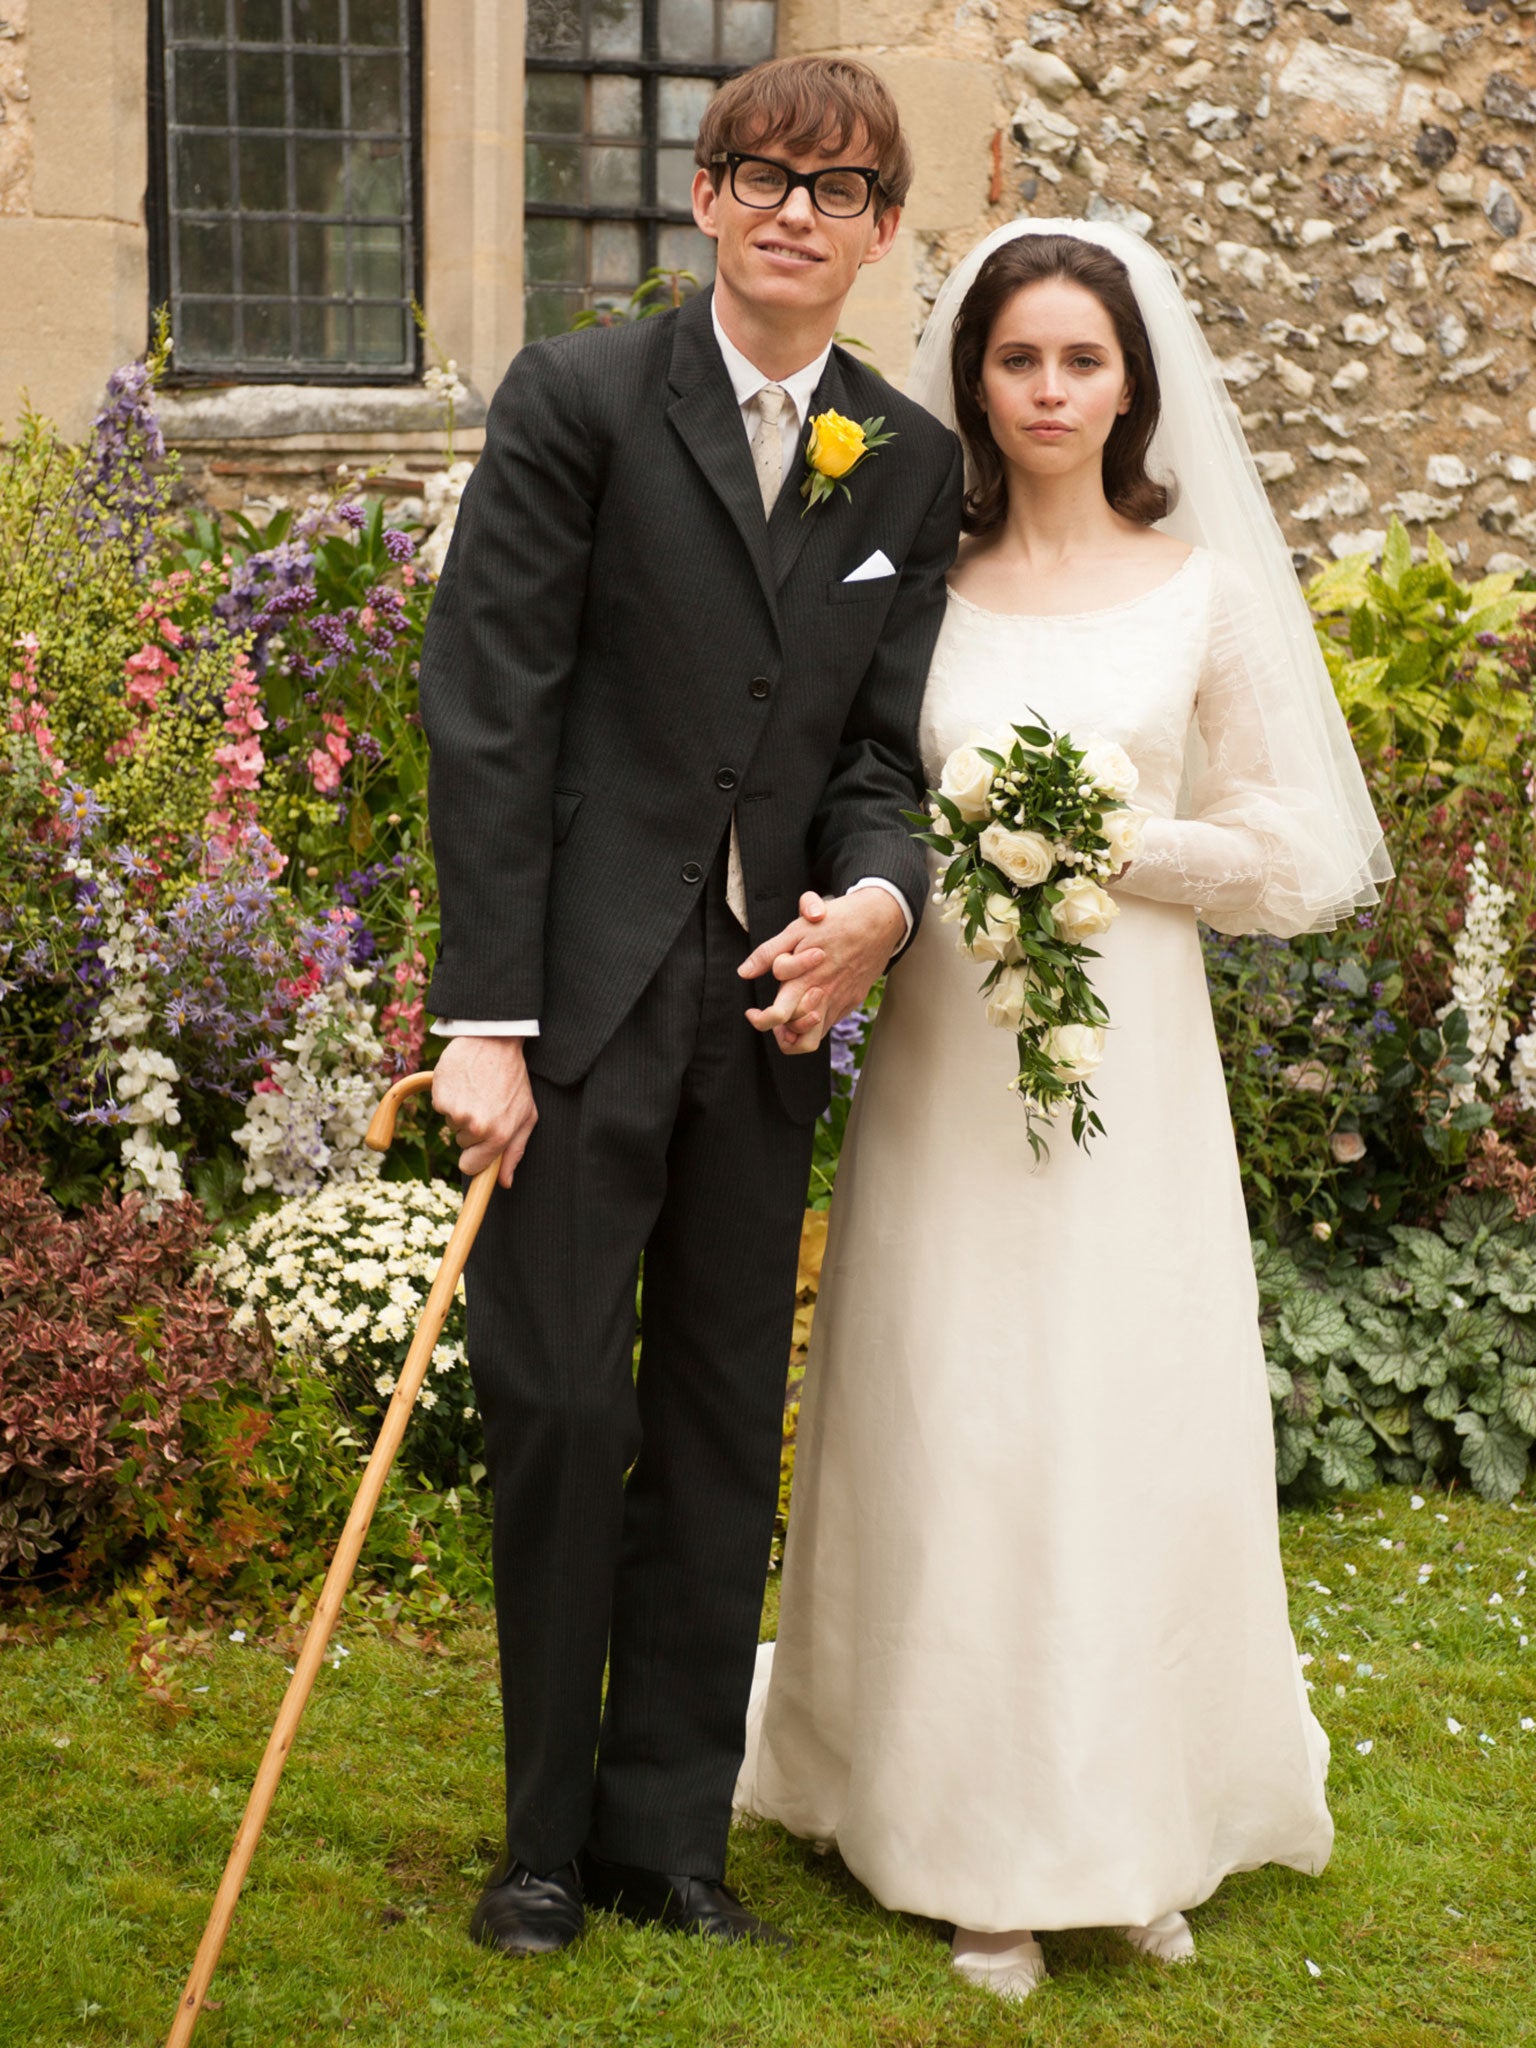 Eddie Redmayne and Felicity Jones as Stephen Hawking and Jane Wilde in a still from 'The Theory of Everything'